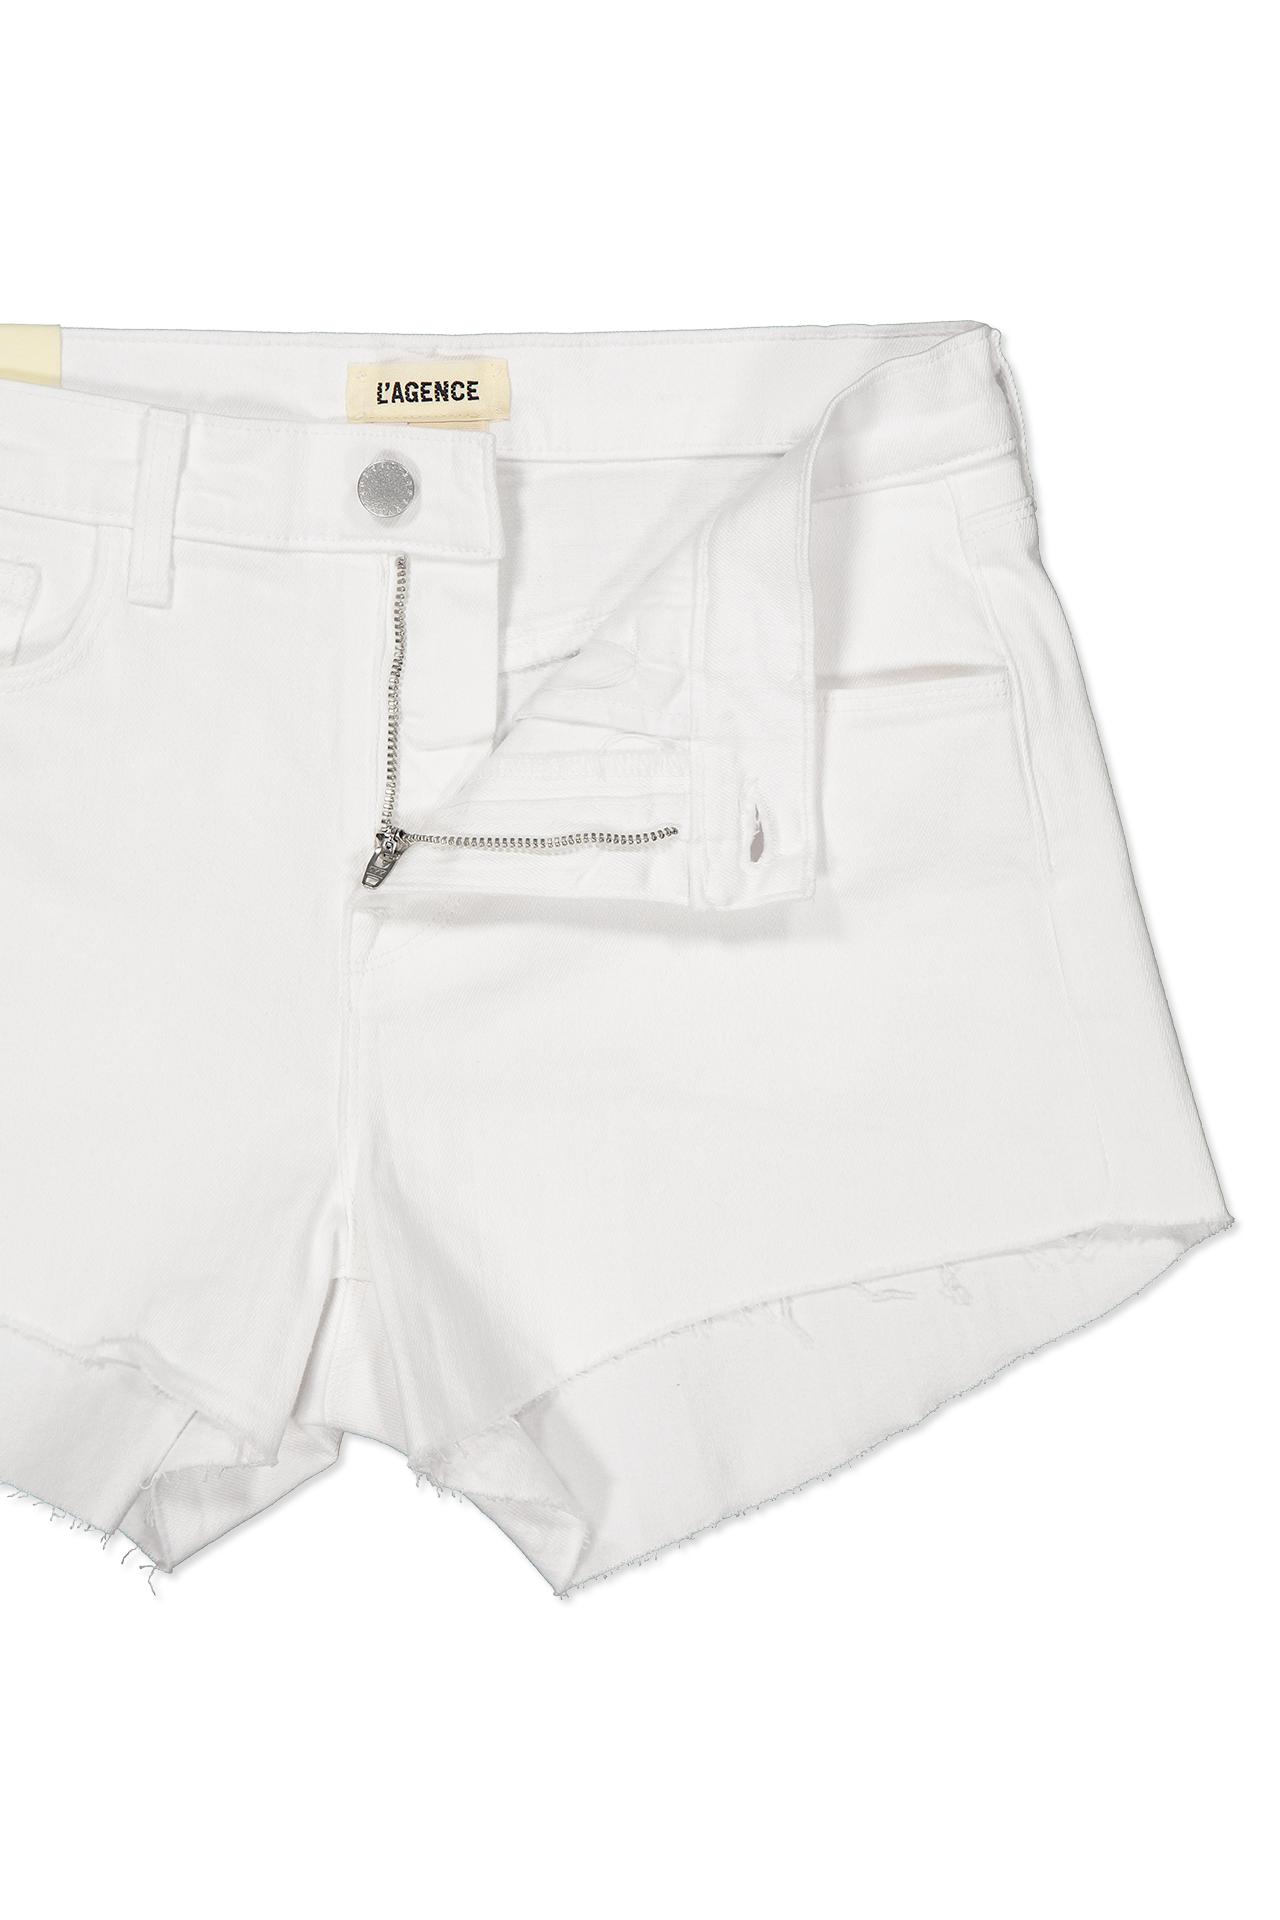 Lagence Audrey Mid-Rise Short White Fly Detail Image (6605789659251)